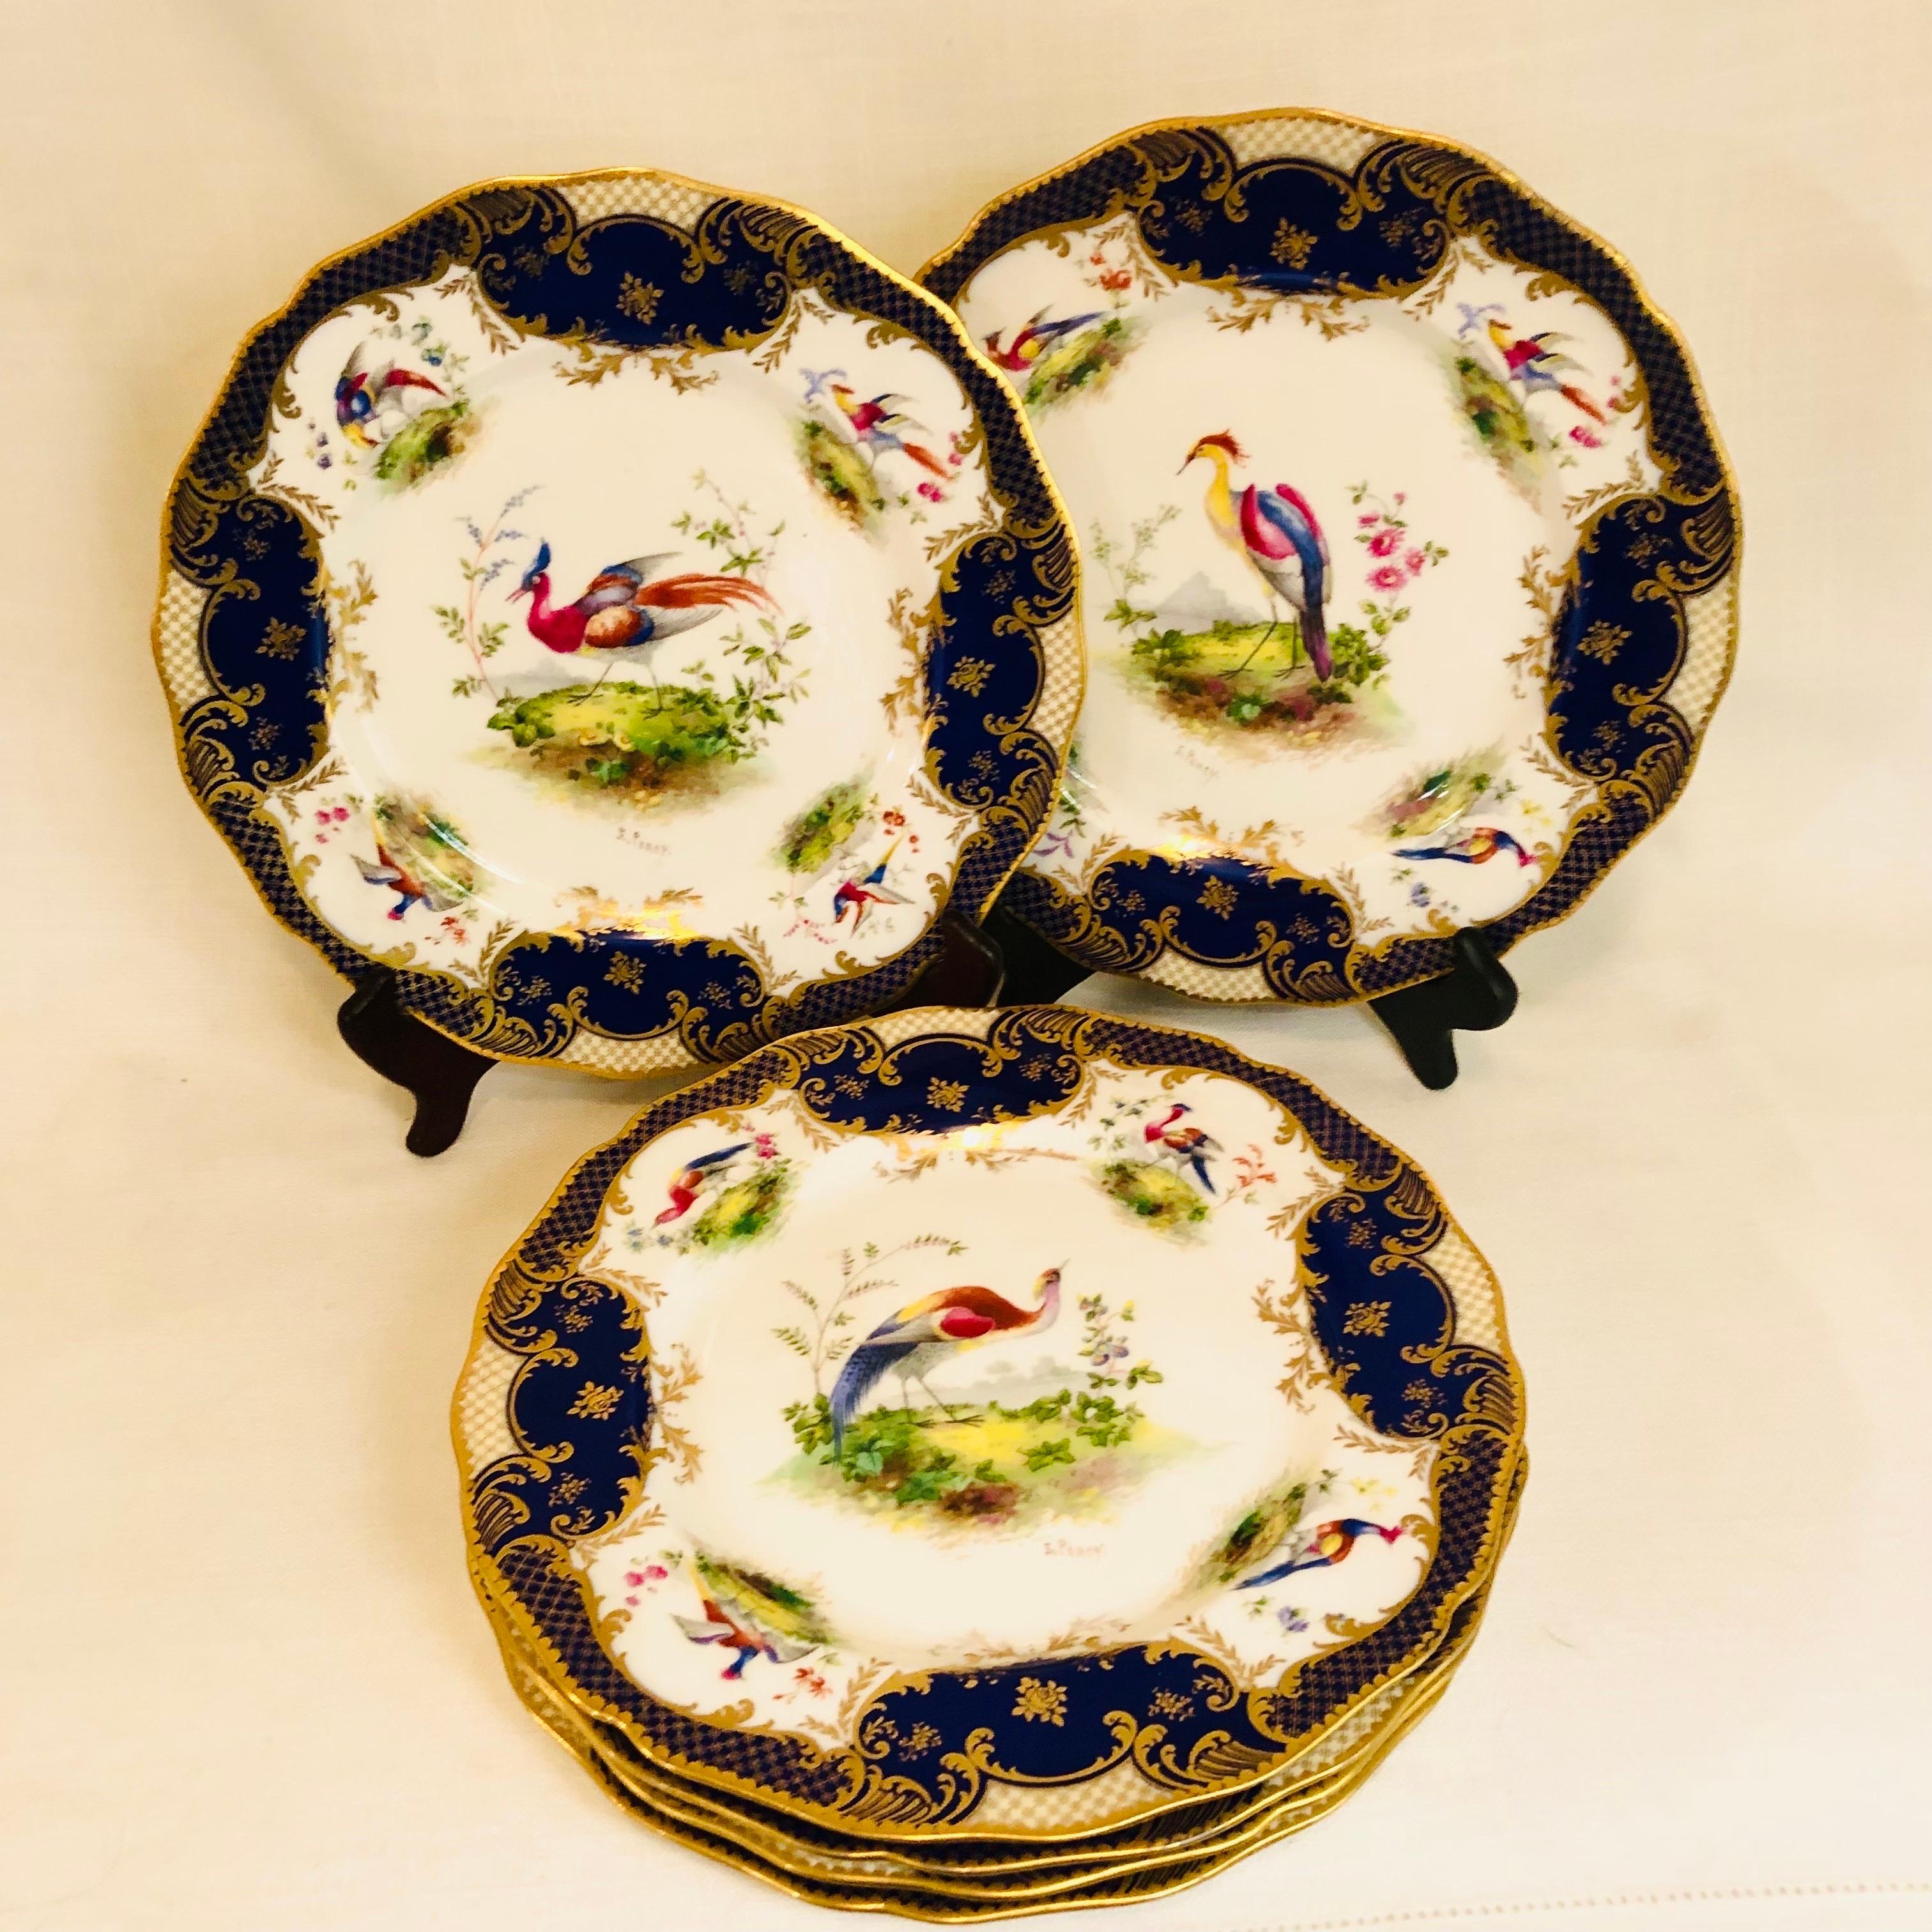 Porcelain Set of 6 Cobalt Royal Doulton Made for Tiffany Dinner Plates with Exotic Birds